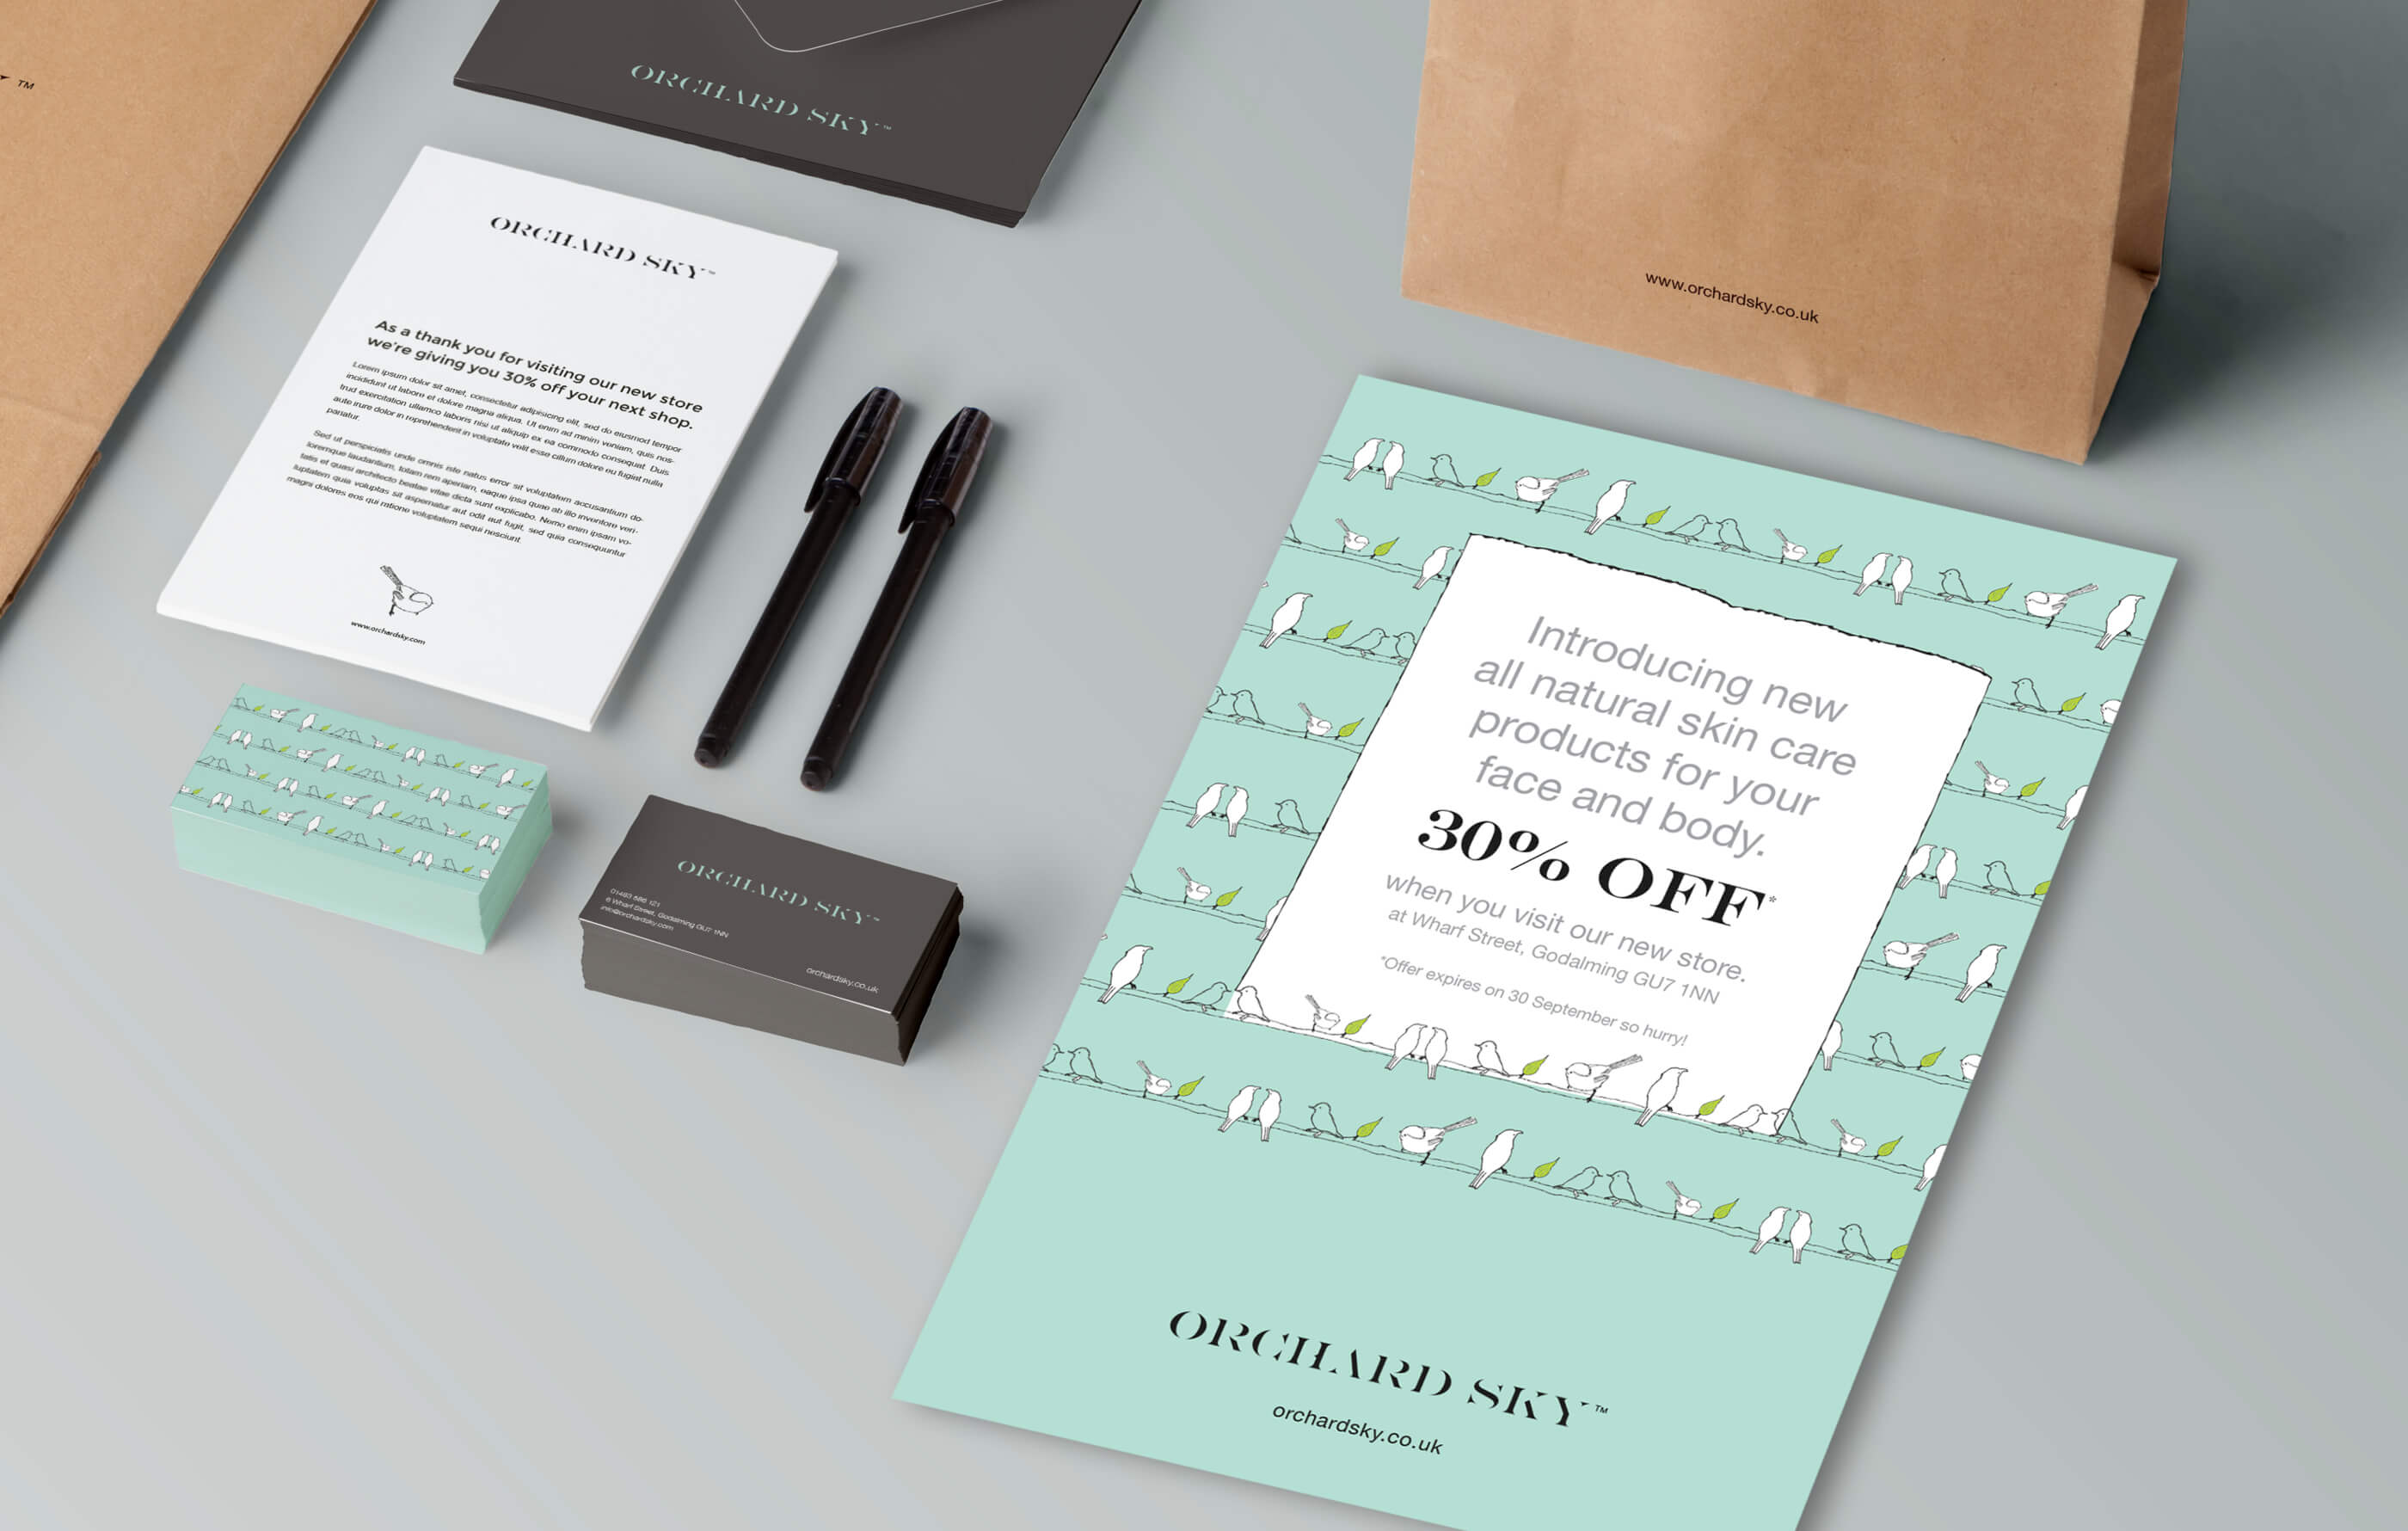 Photorealistic mock up of Orchard Sky stationery and branded collateral, including promo flyer, business card, pen and an envelope